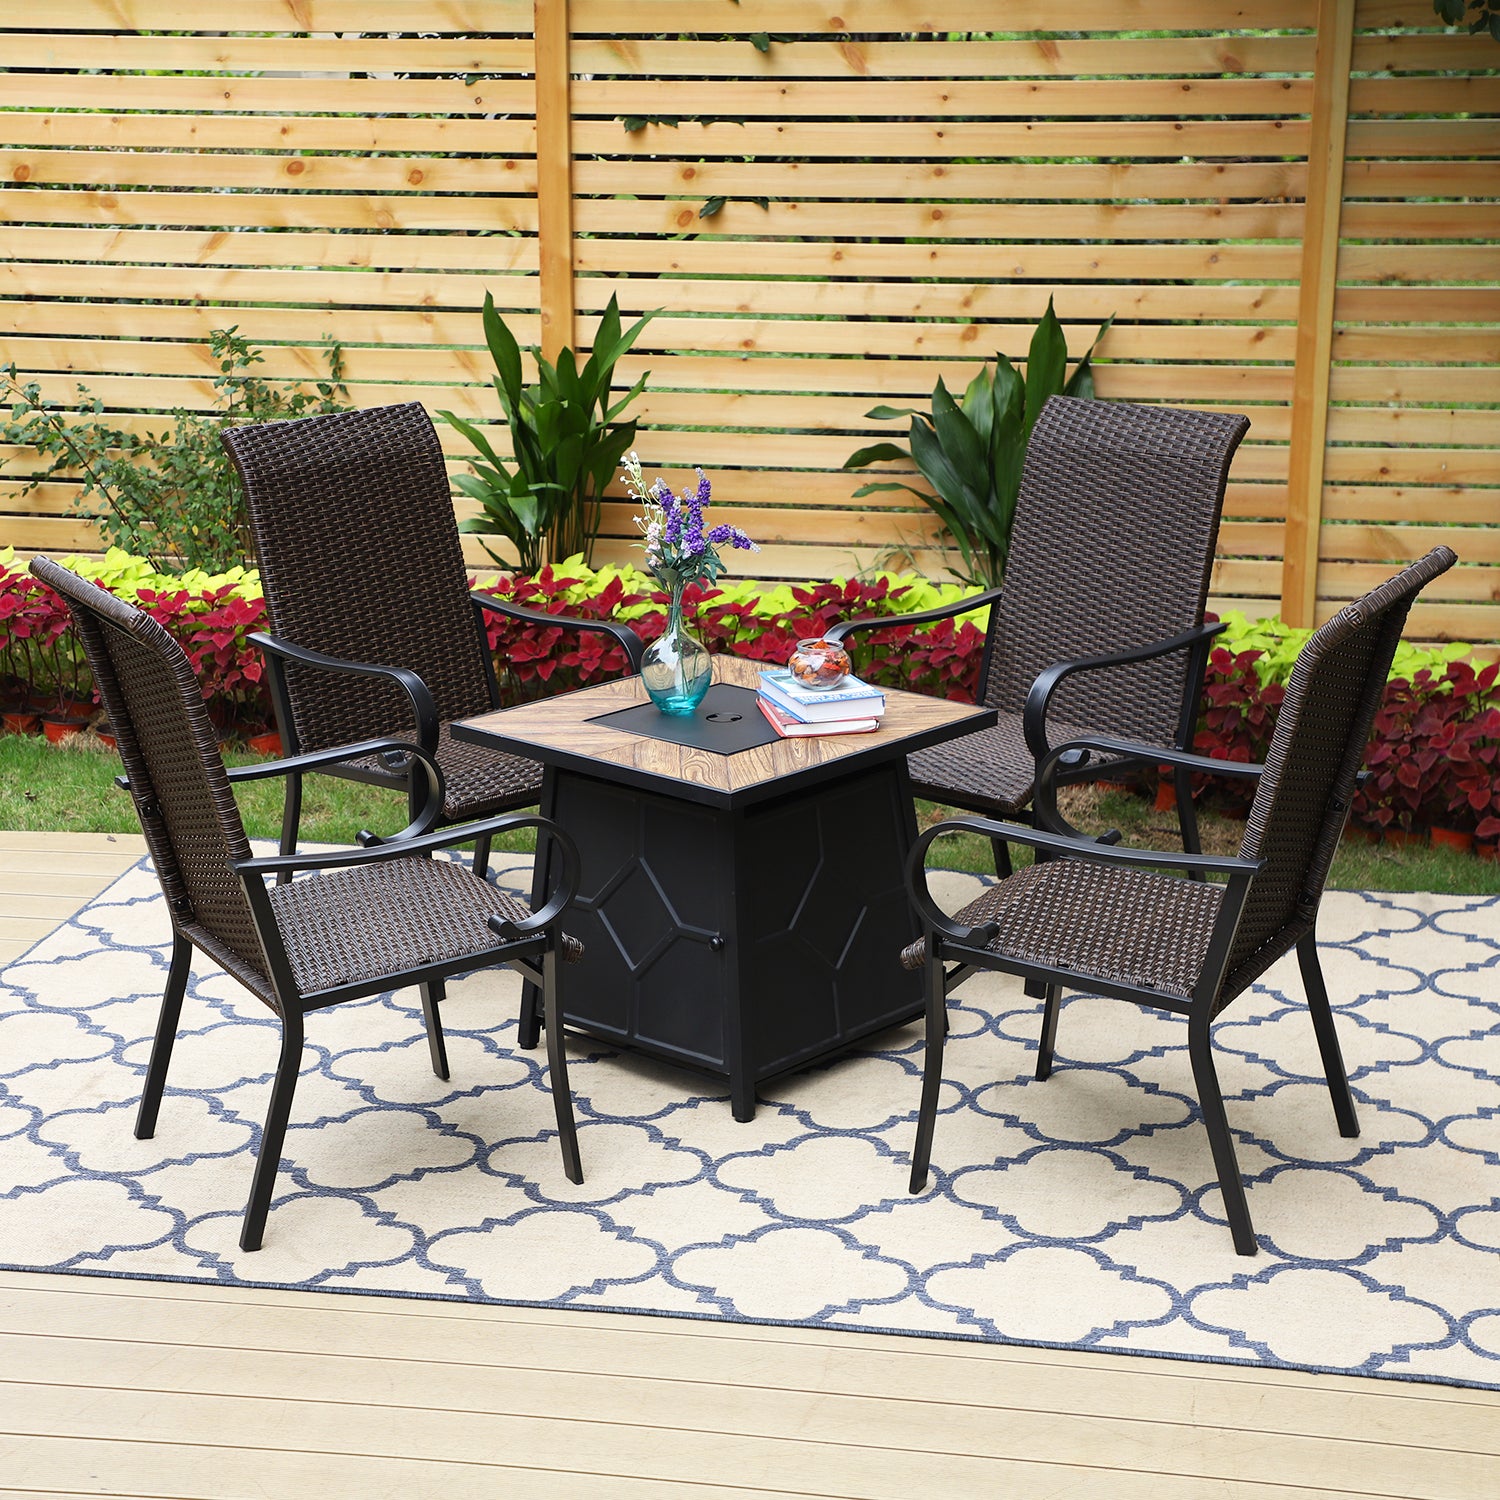 PHI VILLA 5-Piece TerraFab Fire Pit Table Patio Dining Set 28 Inch 40,000BTU Fire Pit Table & Classic Brown Rattan Chairs